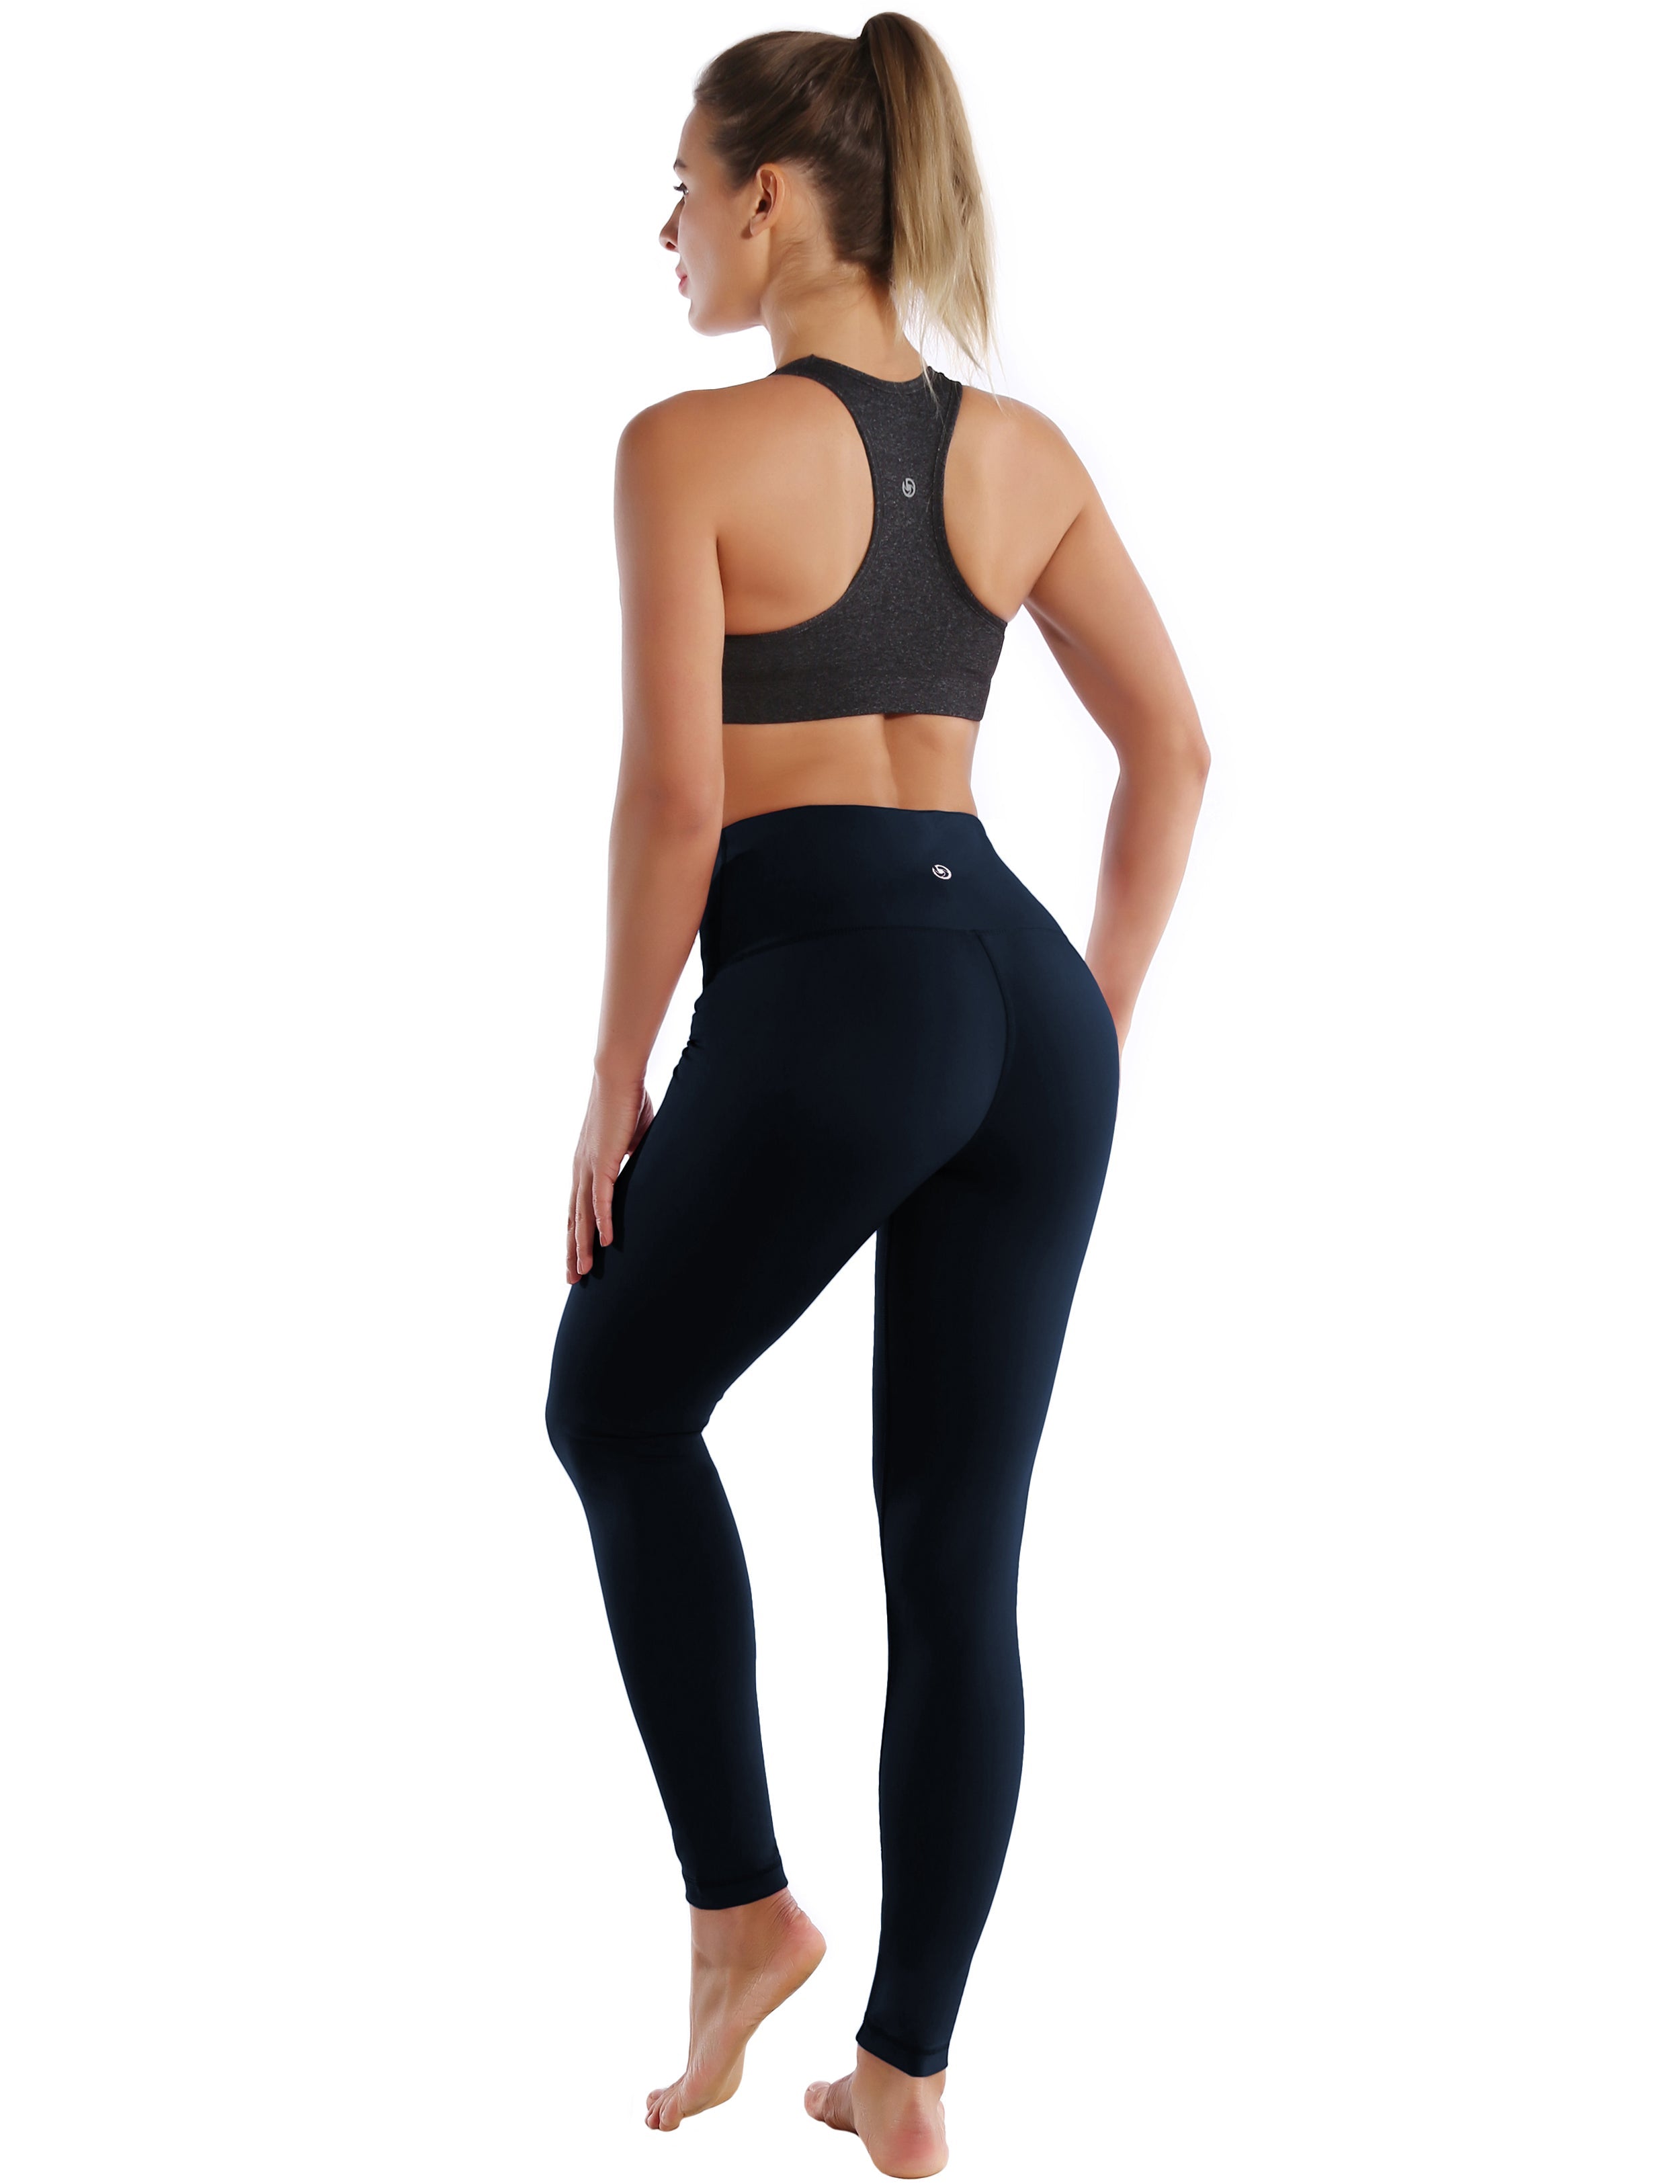 High Waist yogastudio Pants darknavy 75%Nylon/25%Spandex Fabric doesn't attract lint easily 4-way stretch No see-through Moisture-wicking Tummy control Inner pocket Four lengths